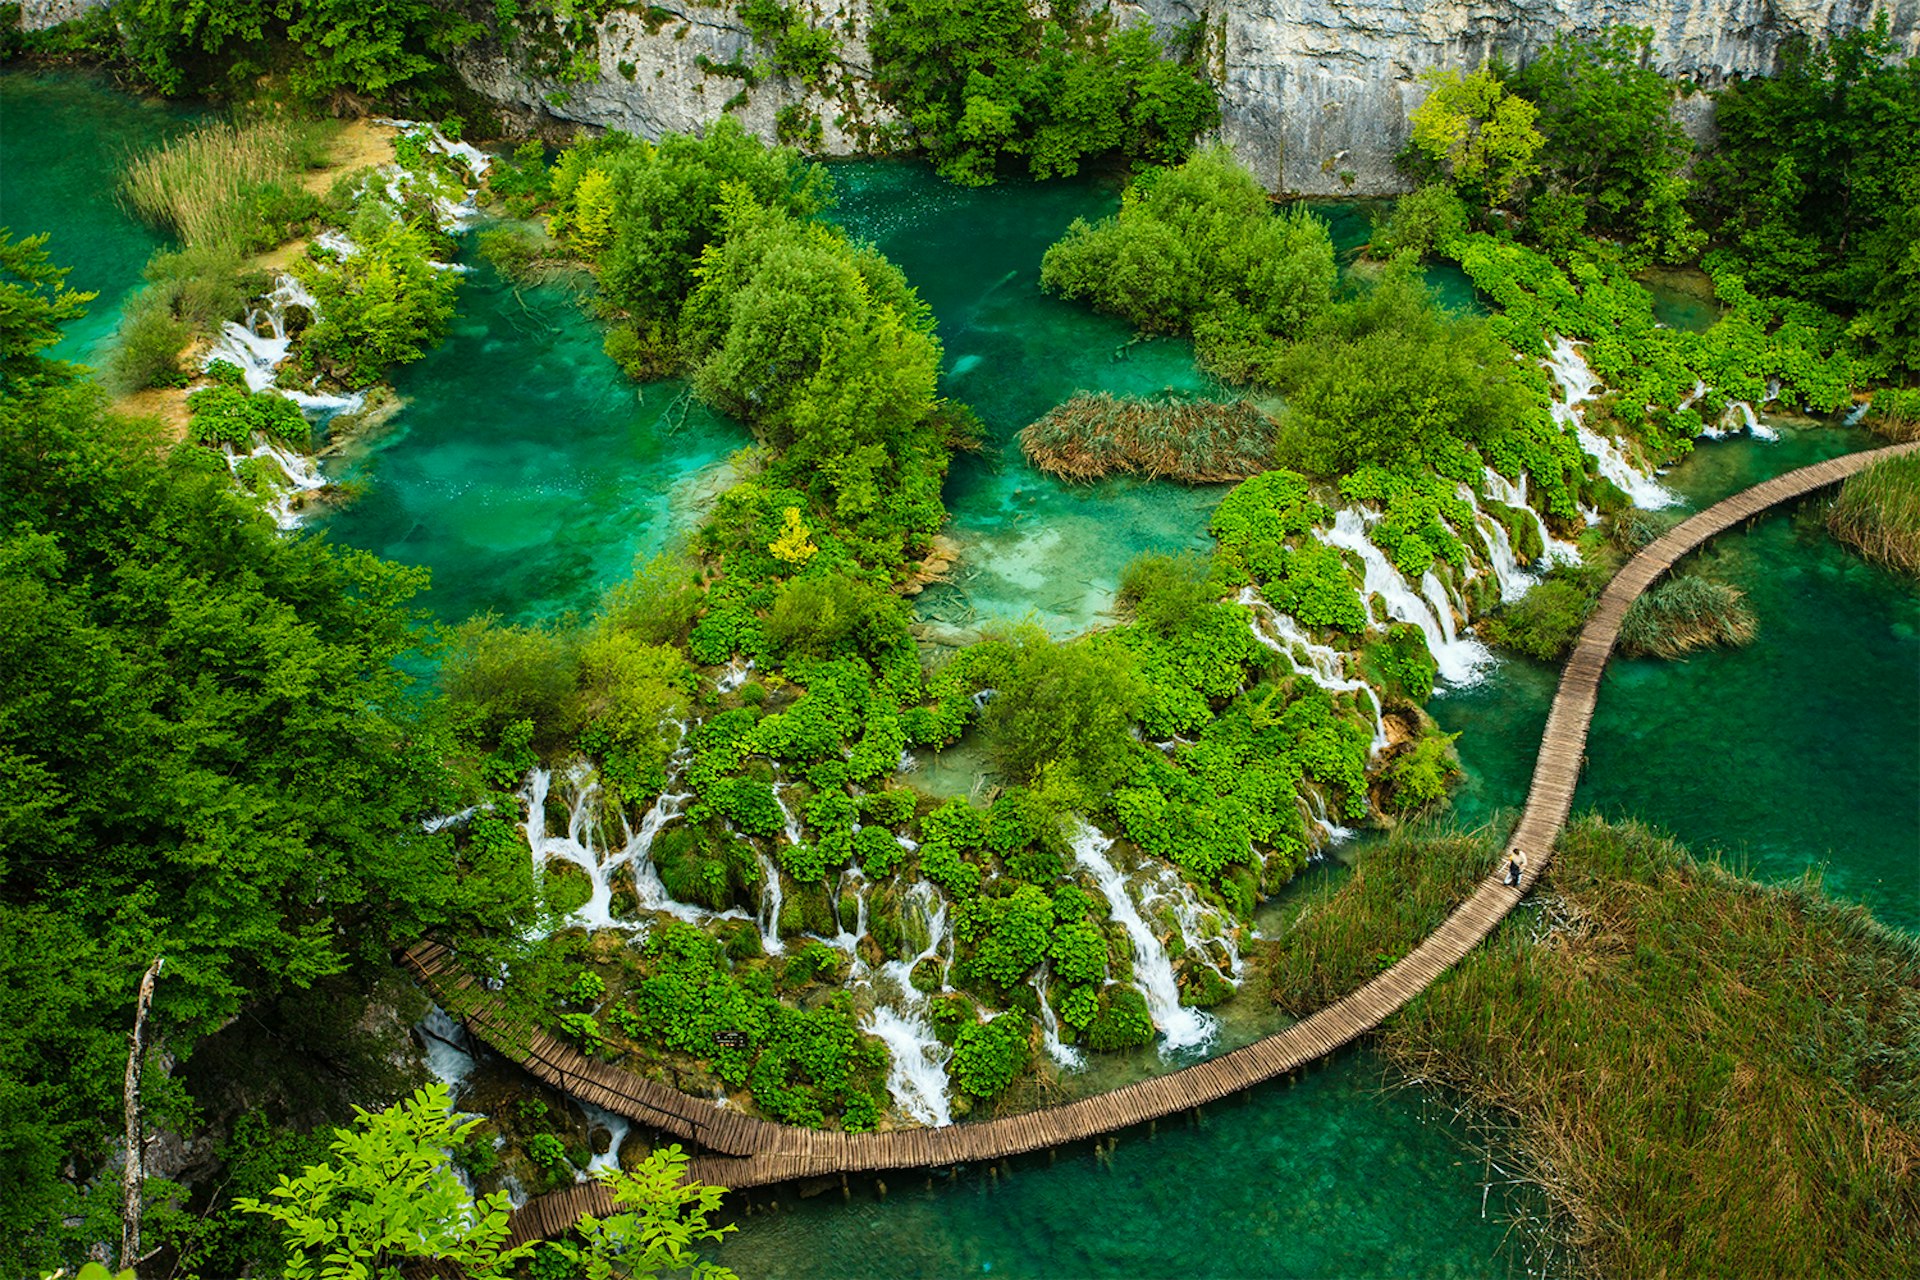 Croatia's Plitvice Lakes National Park © Kelly Cheng Travel Photography / Getty Images